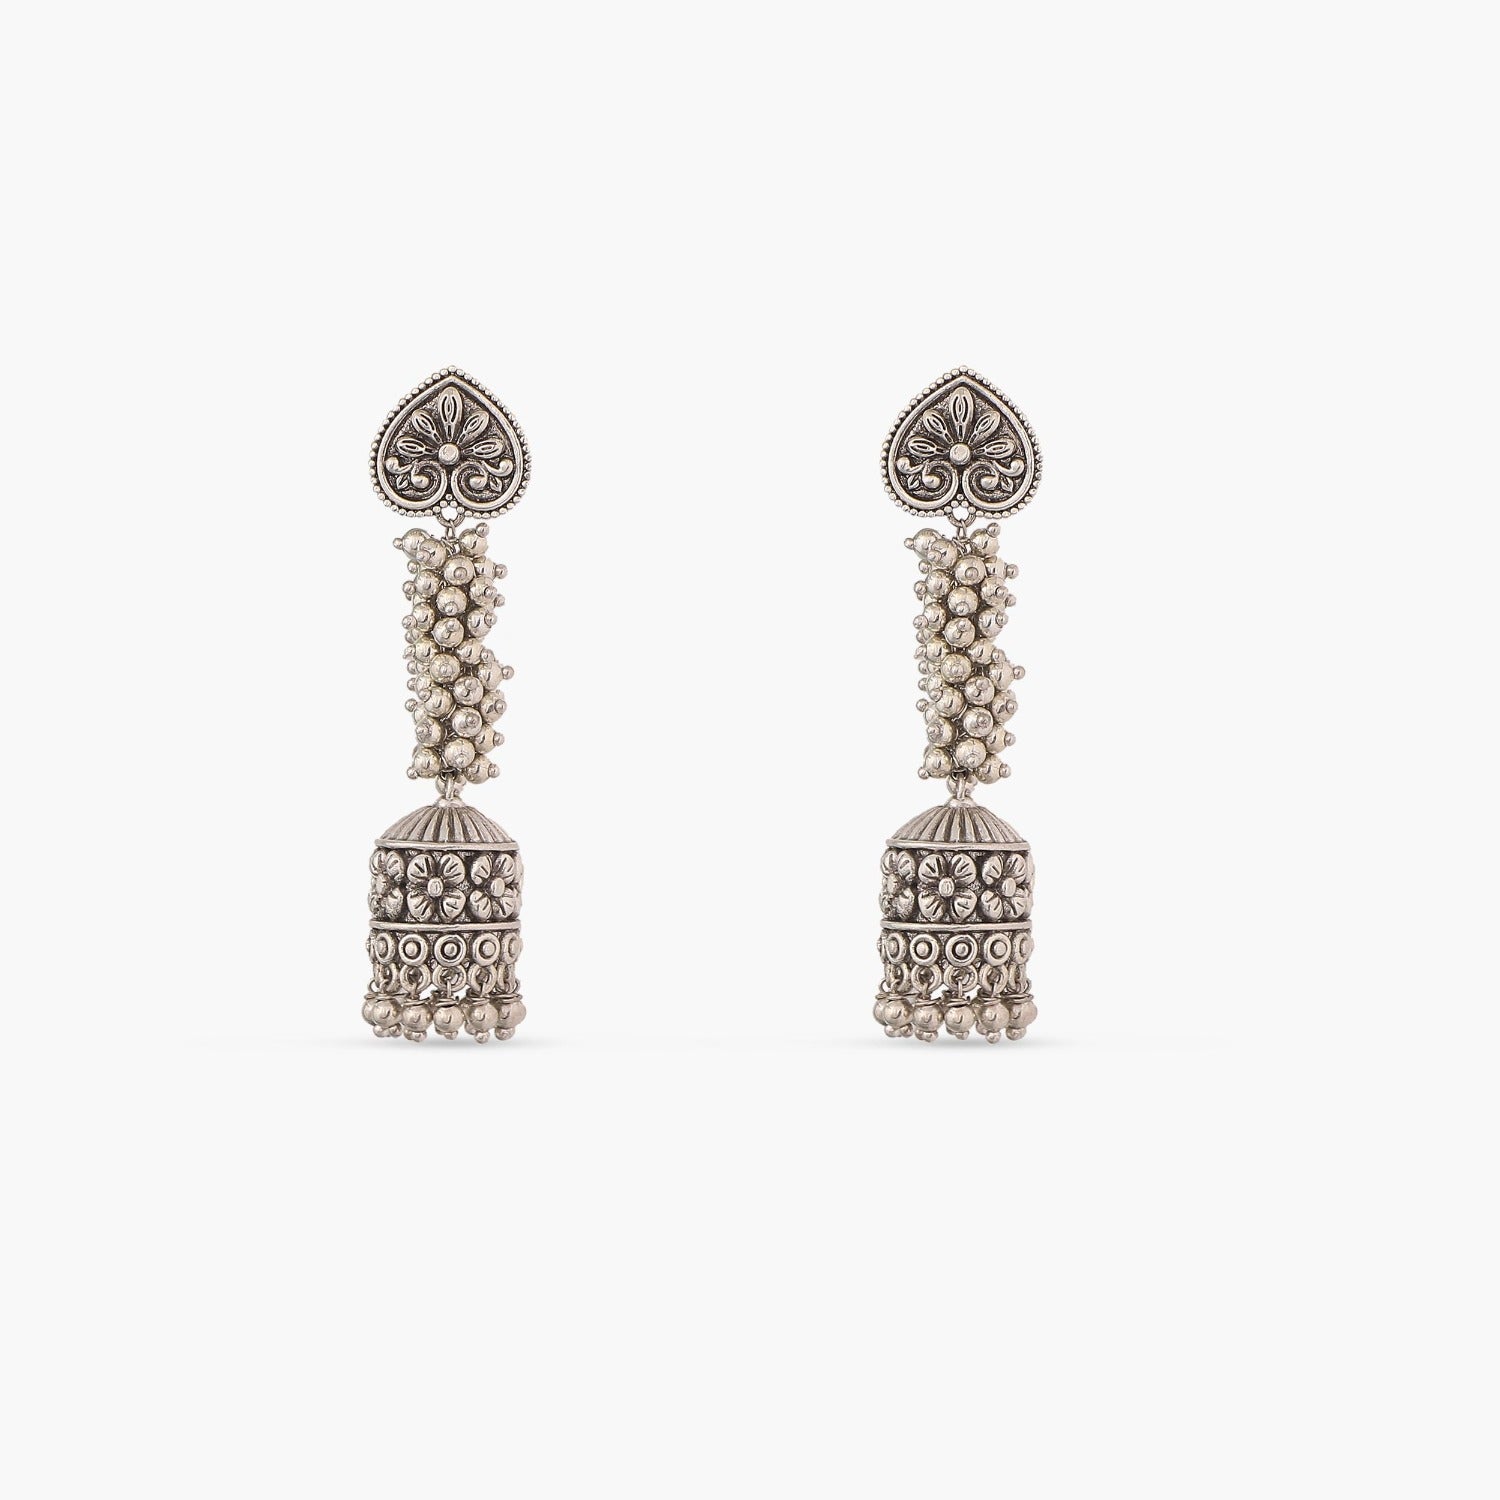 Maati Sparkling Antique Oxidized Drop Earrings